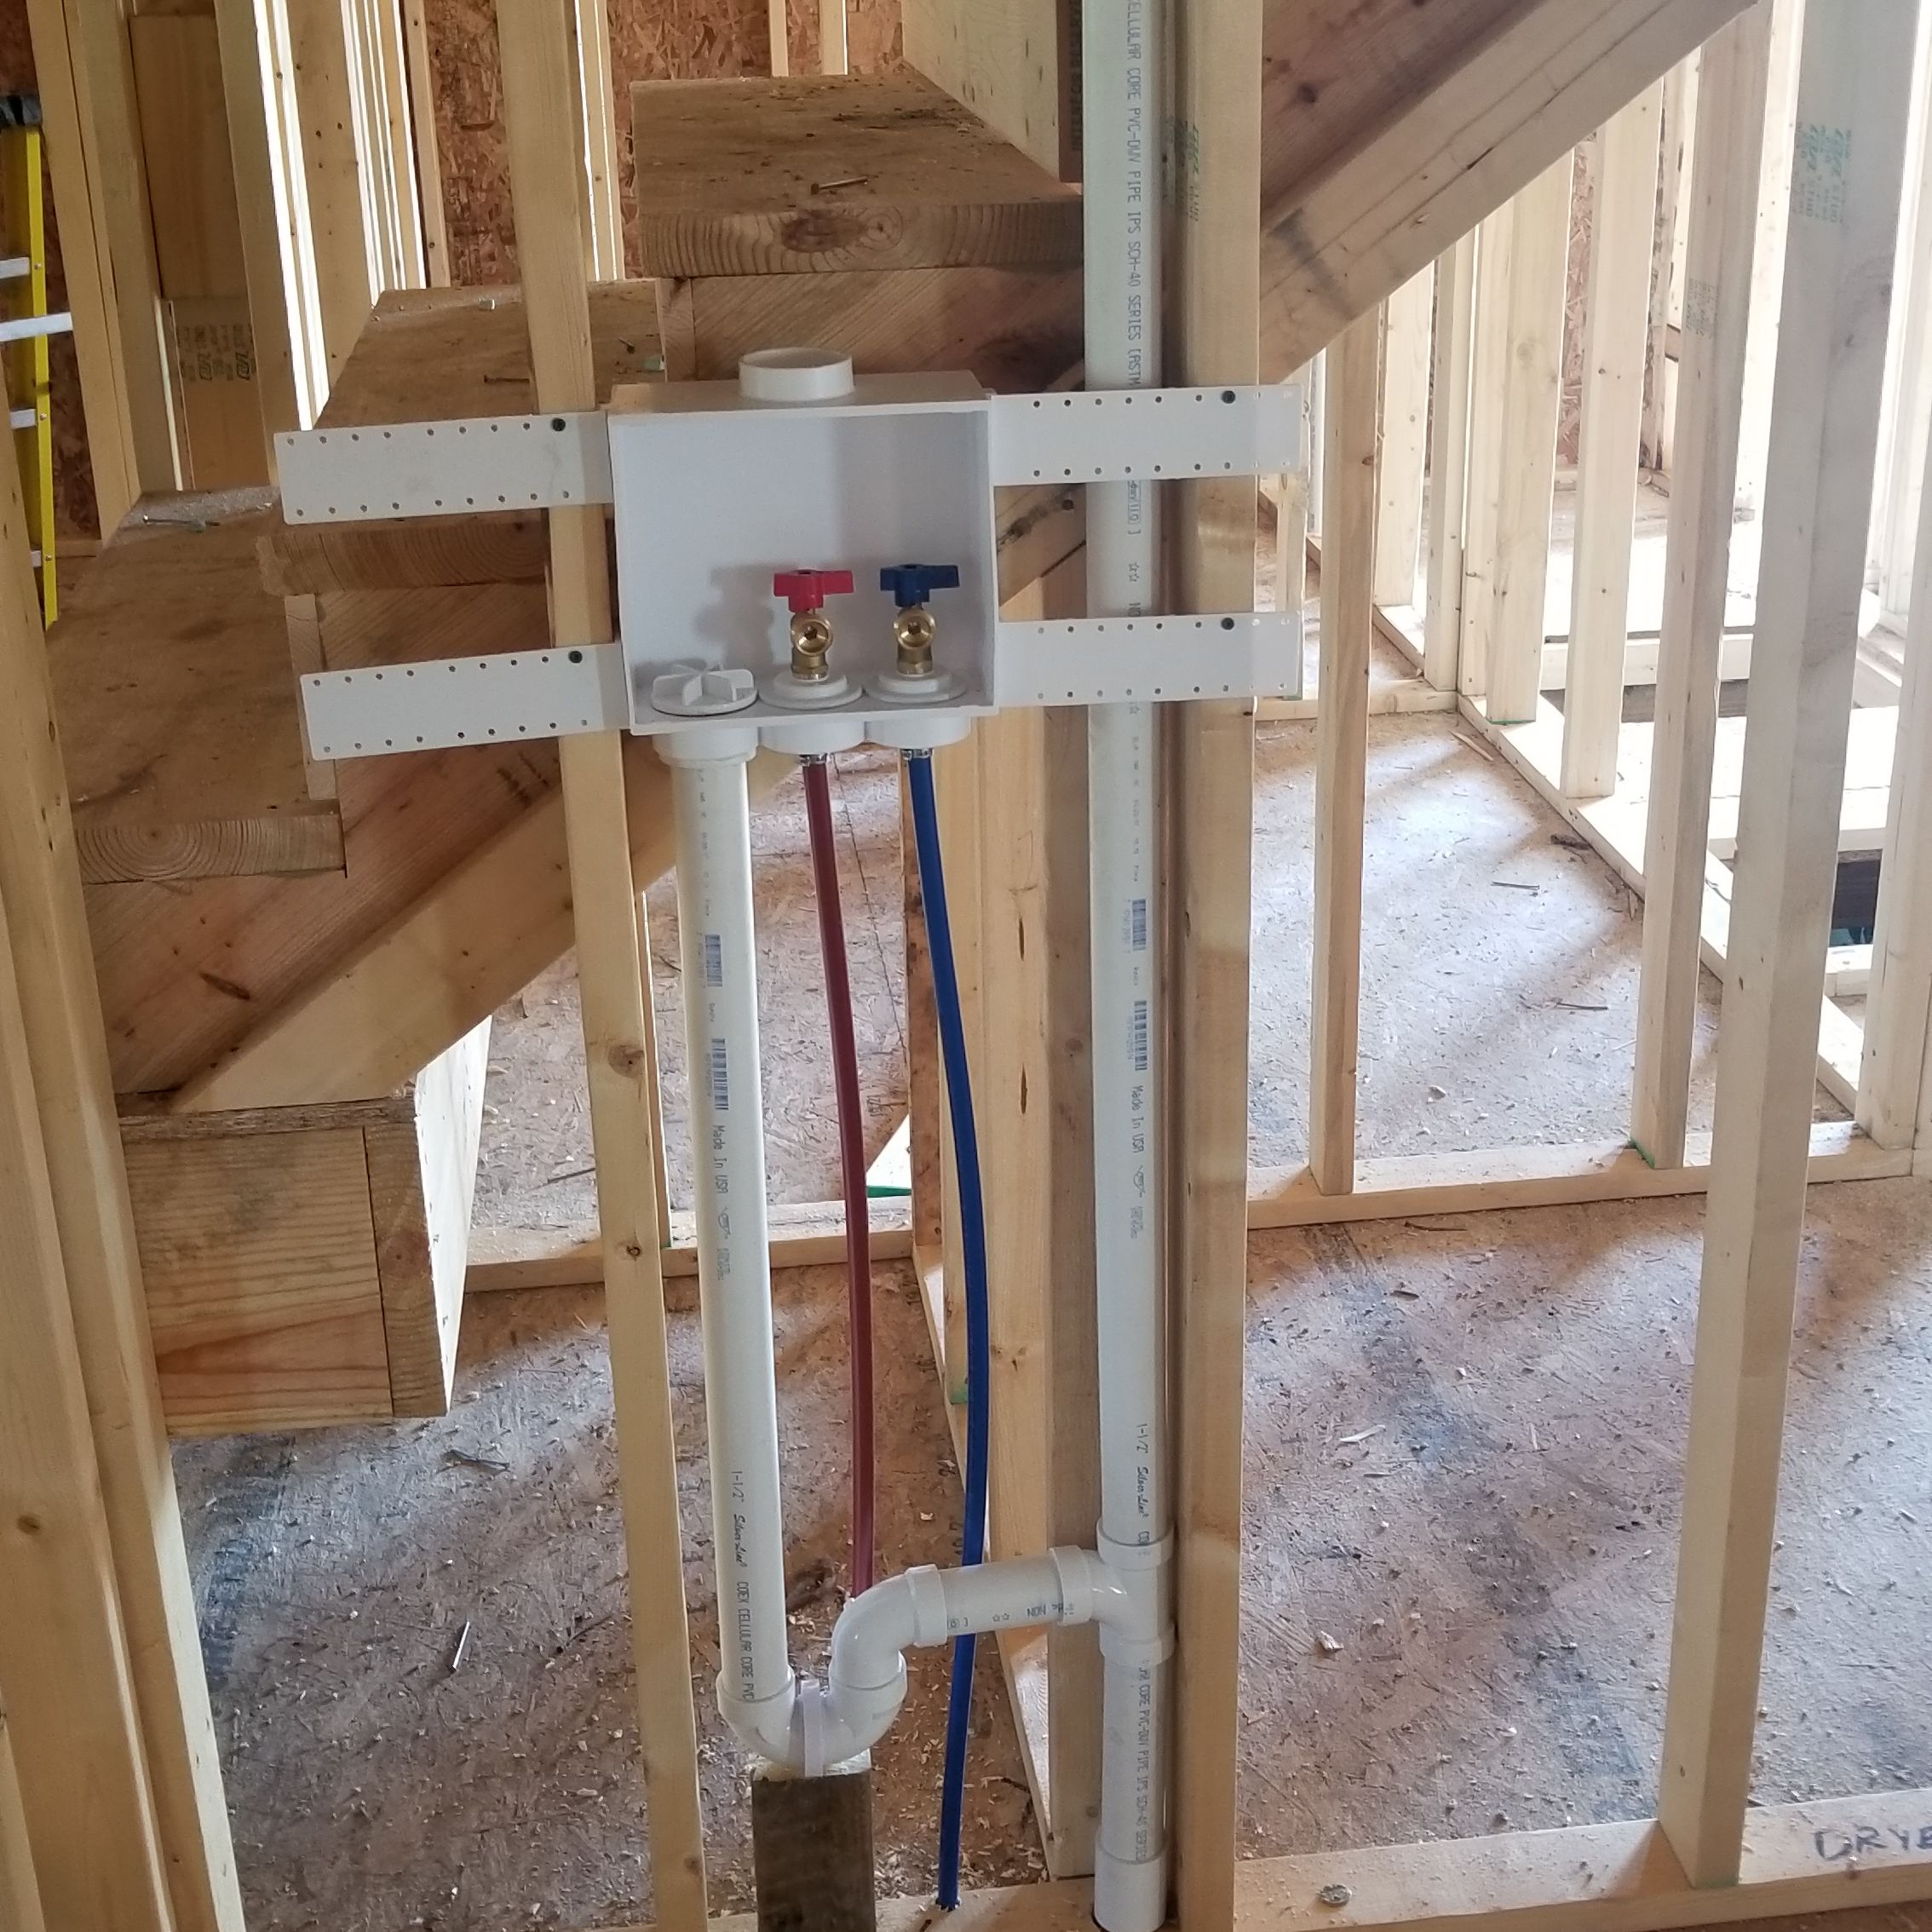 Plumbing Rennovations in Seymour, Indiana